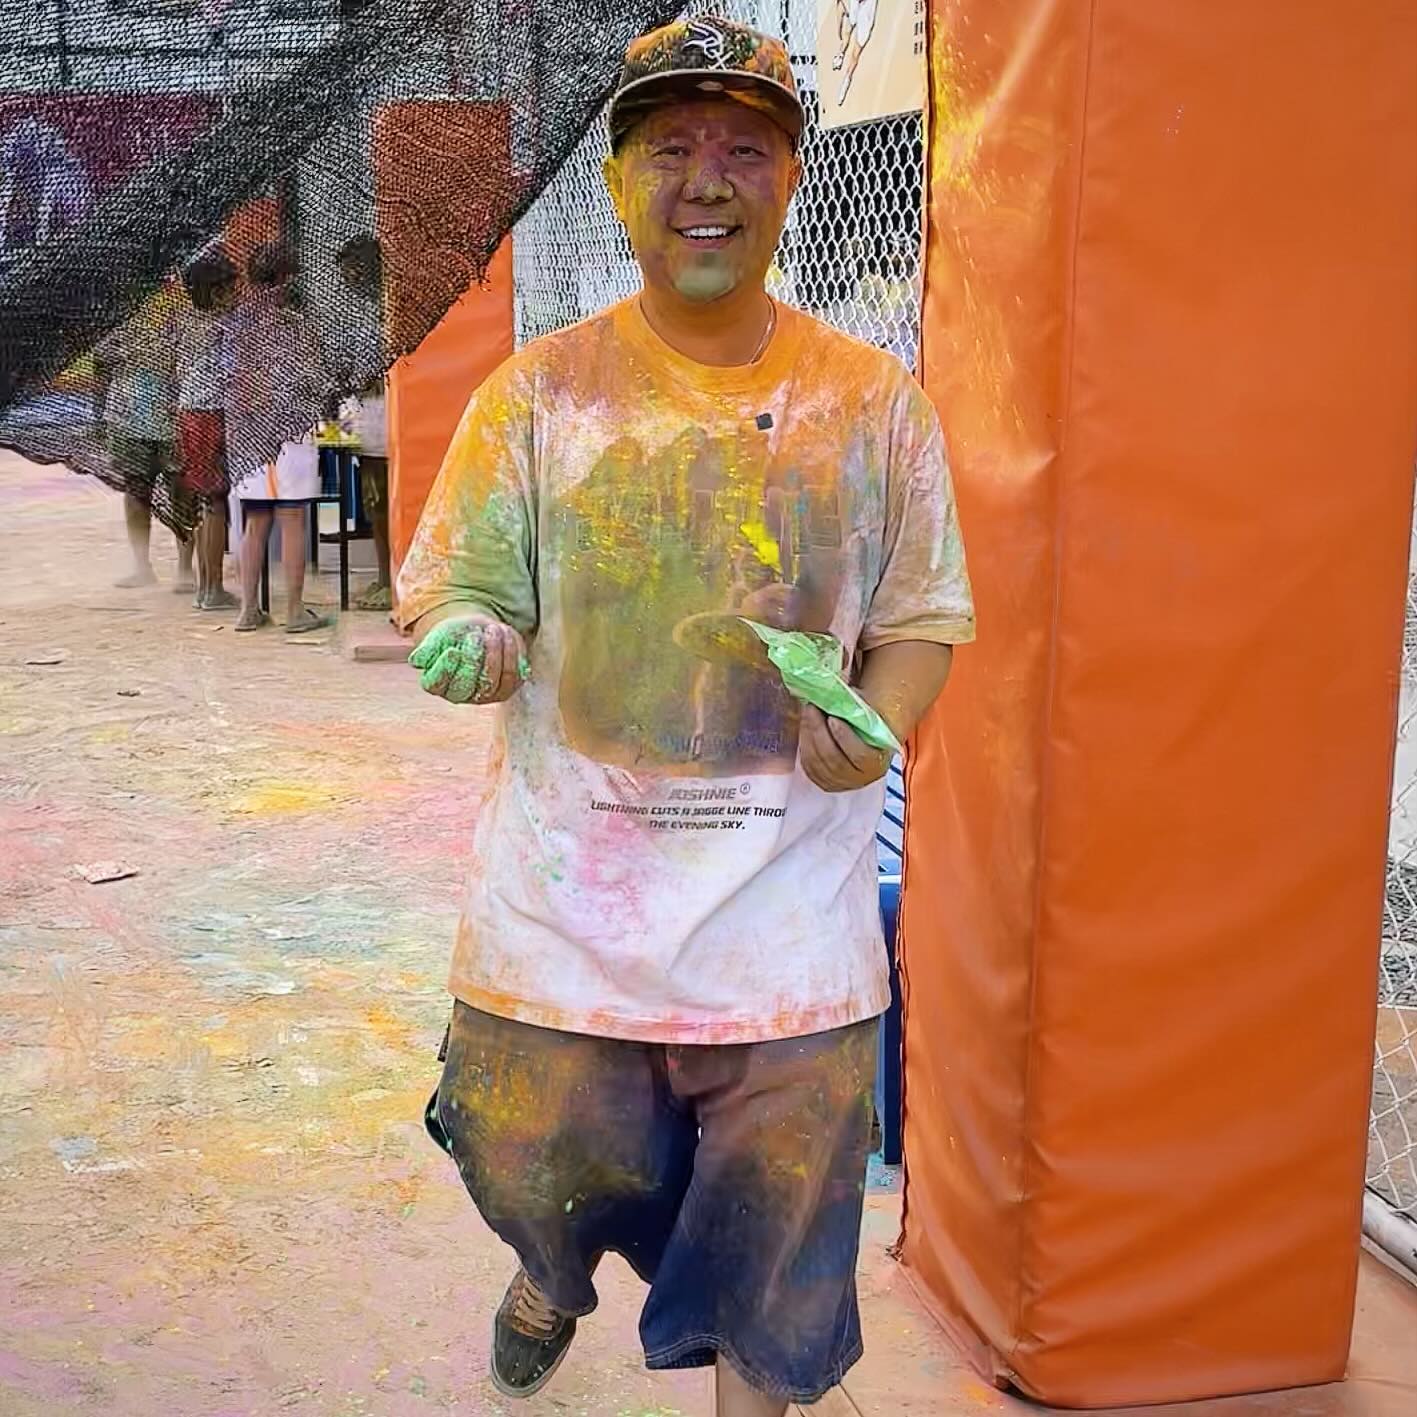 Holi Festival is always a great themed event. Love to see people in the community having fun. #PartyHERE #HoliFestival